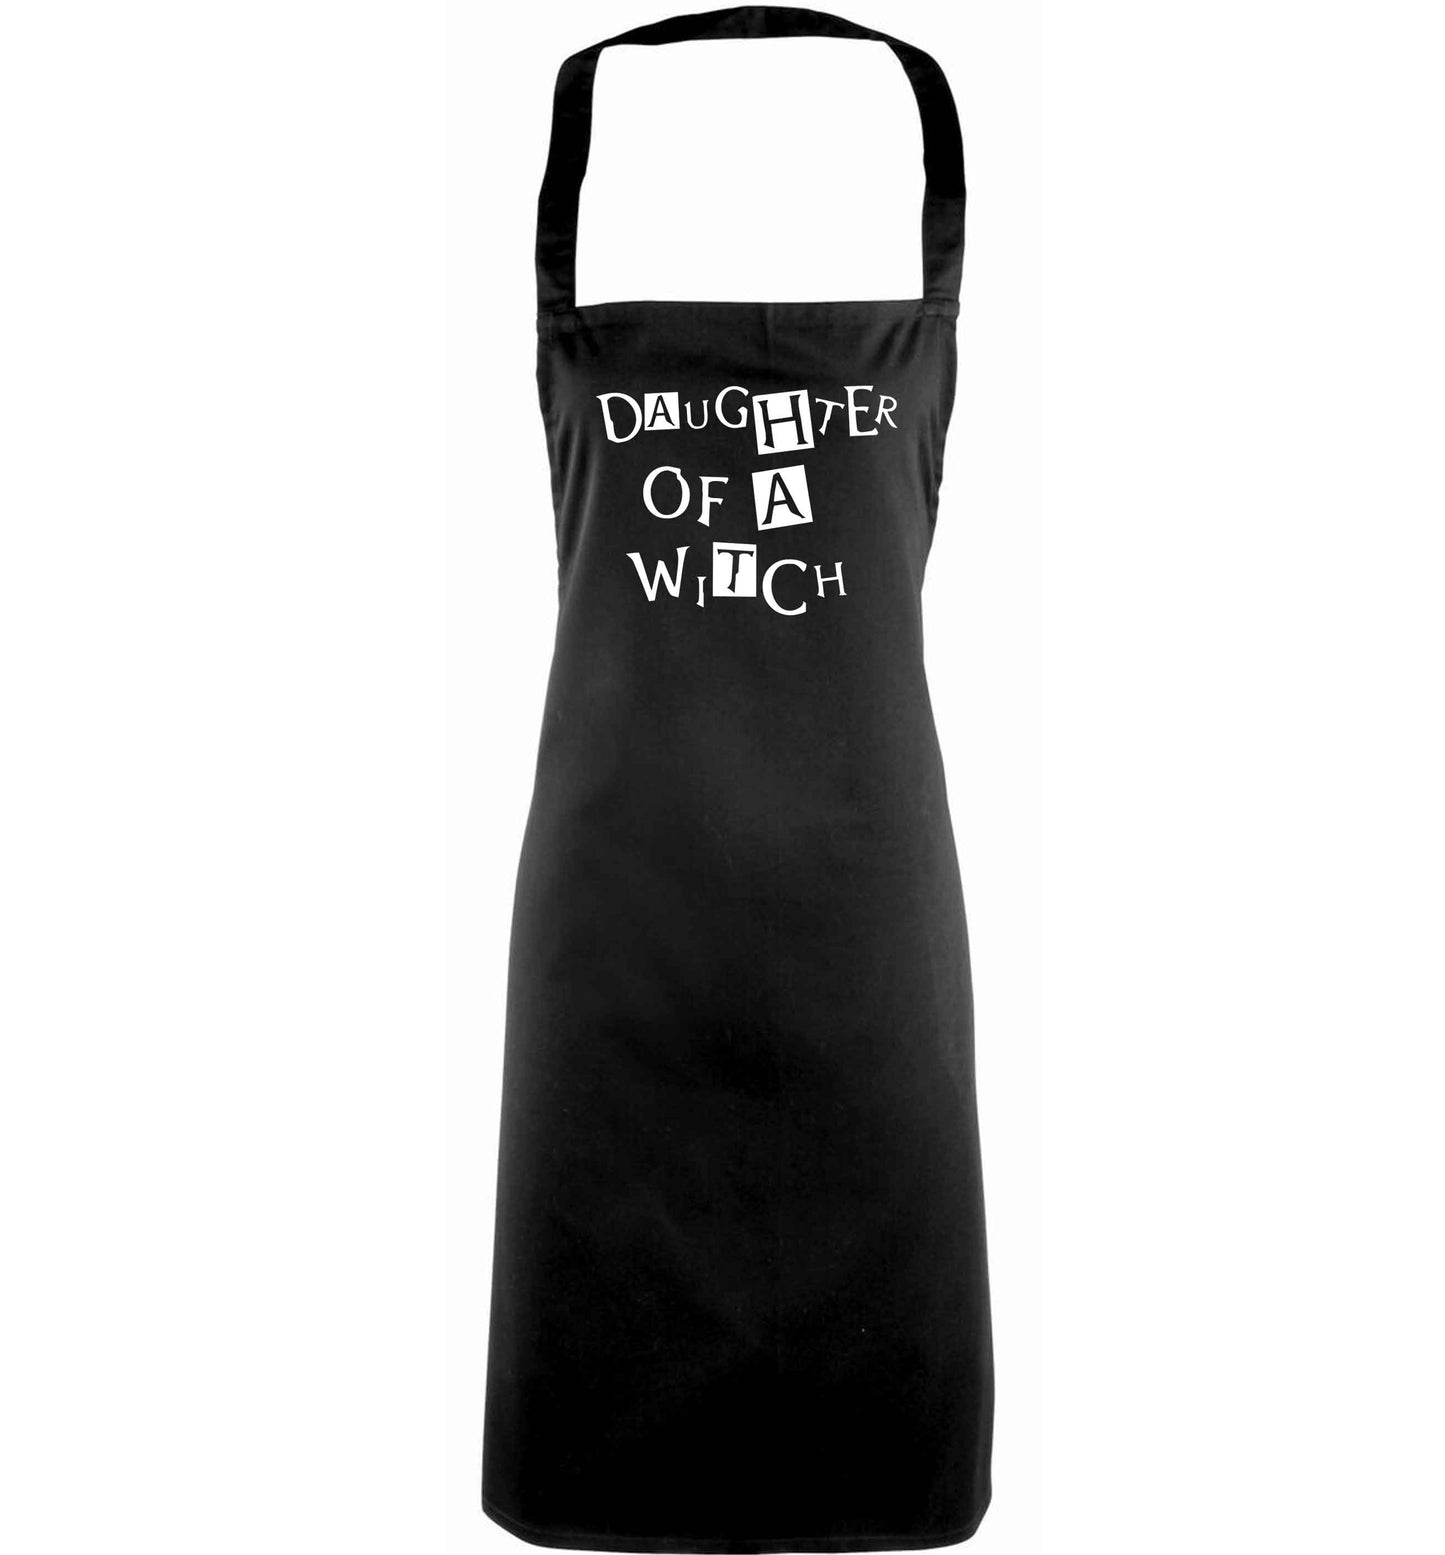 Daughter of a witch adults black apron